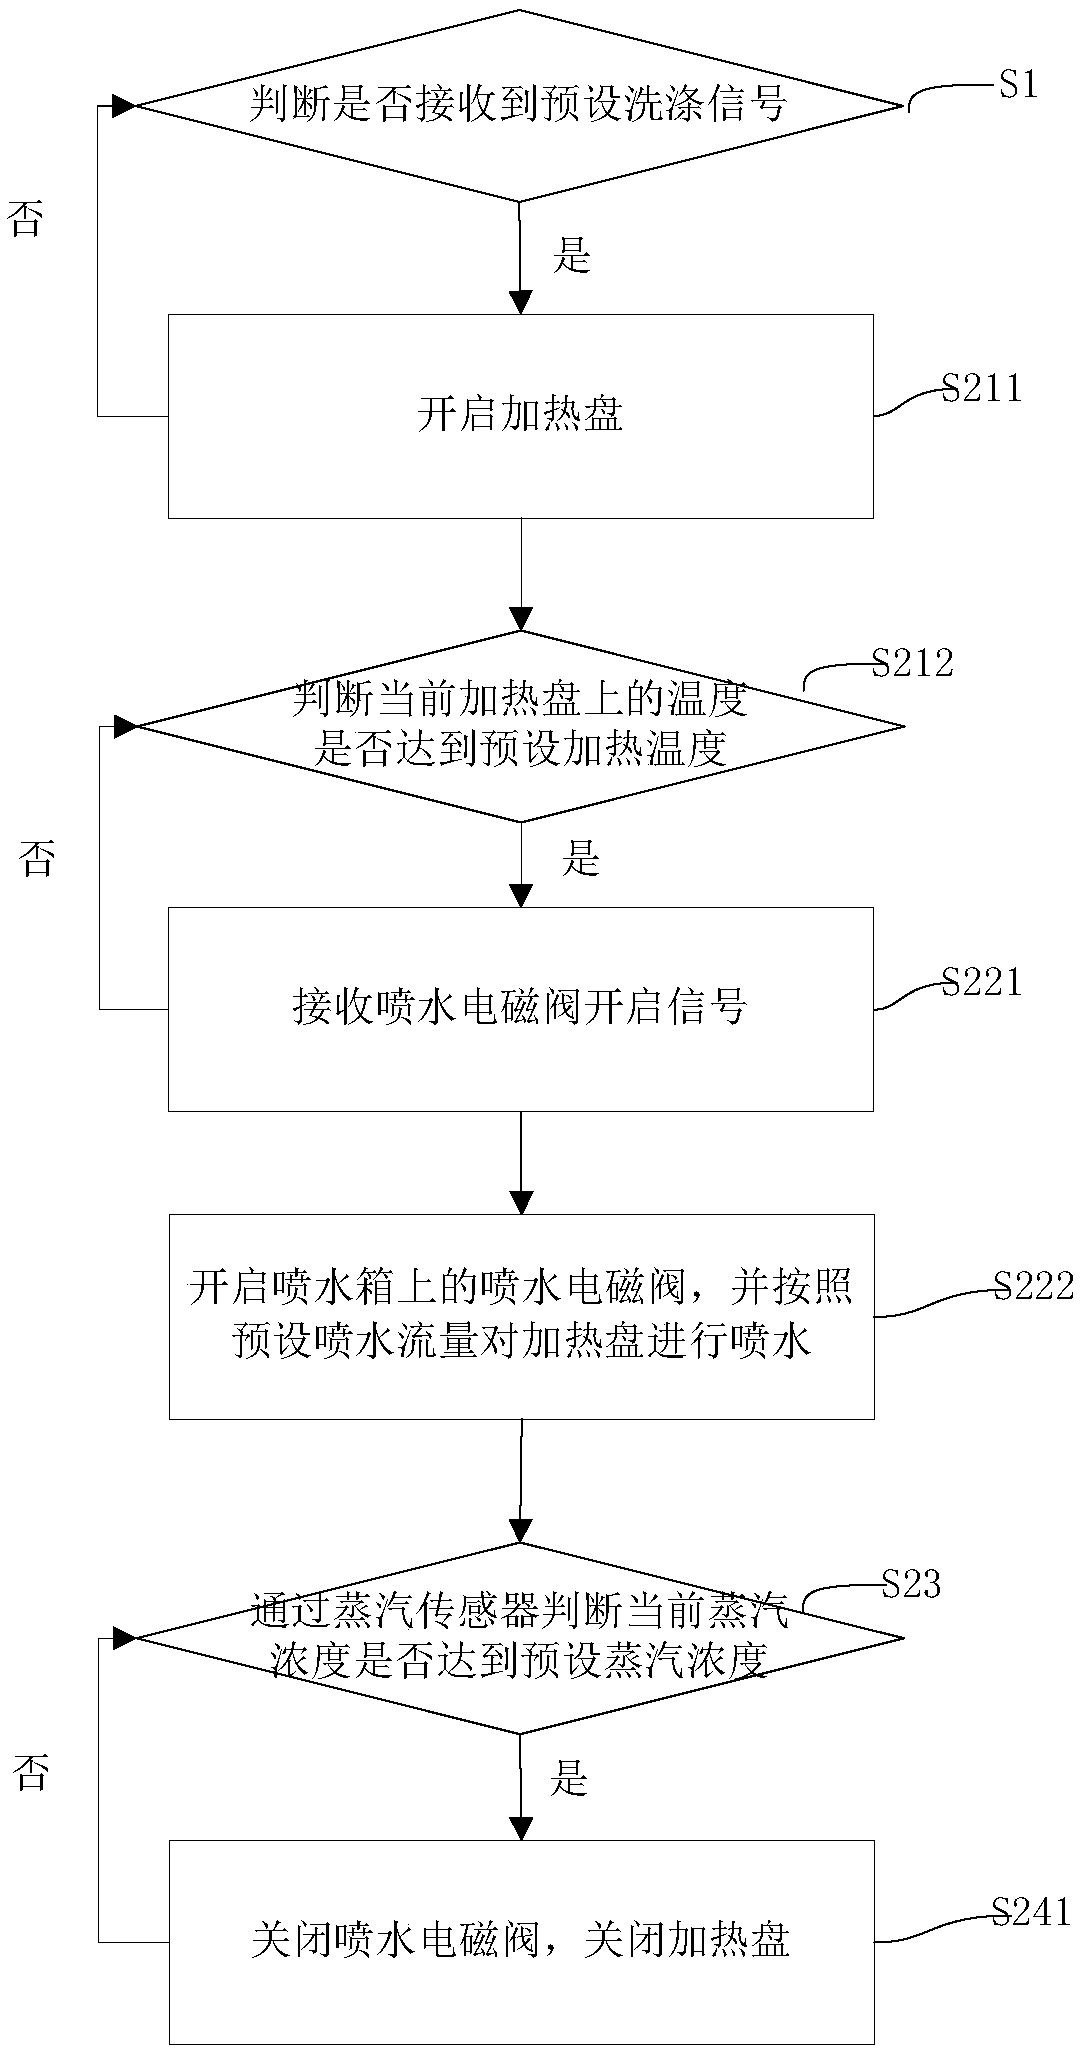 Method and a system for steam pretreatment of a sink of a dishwasher